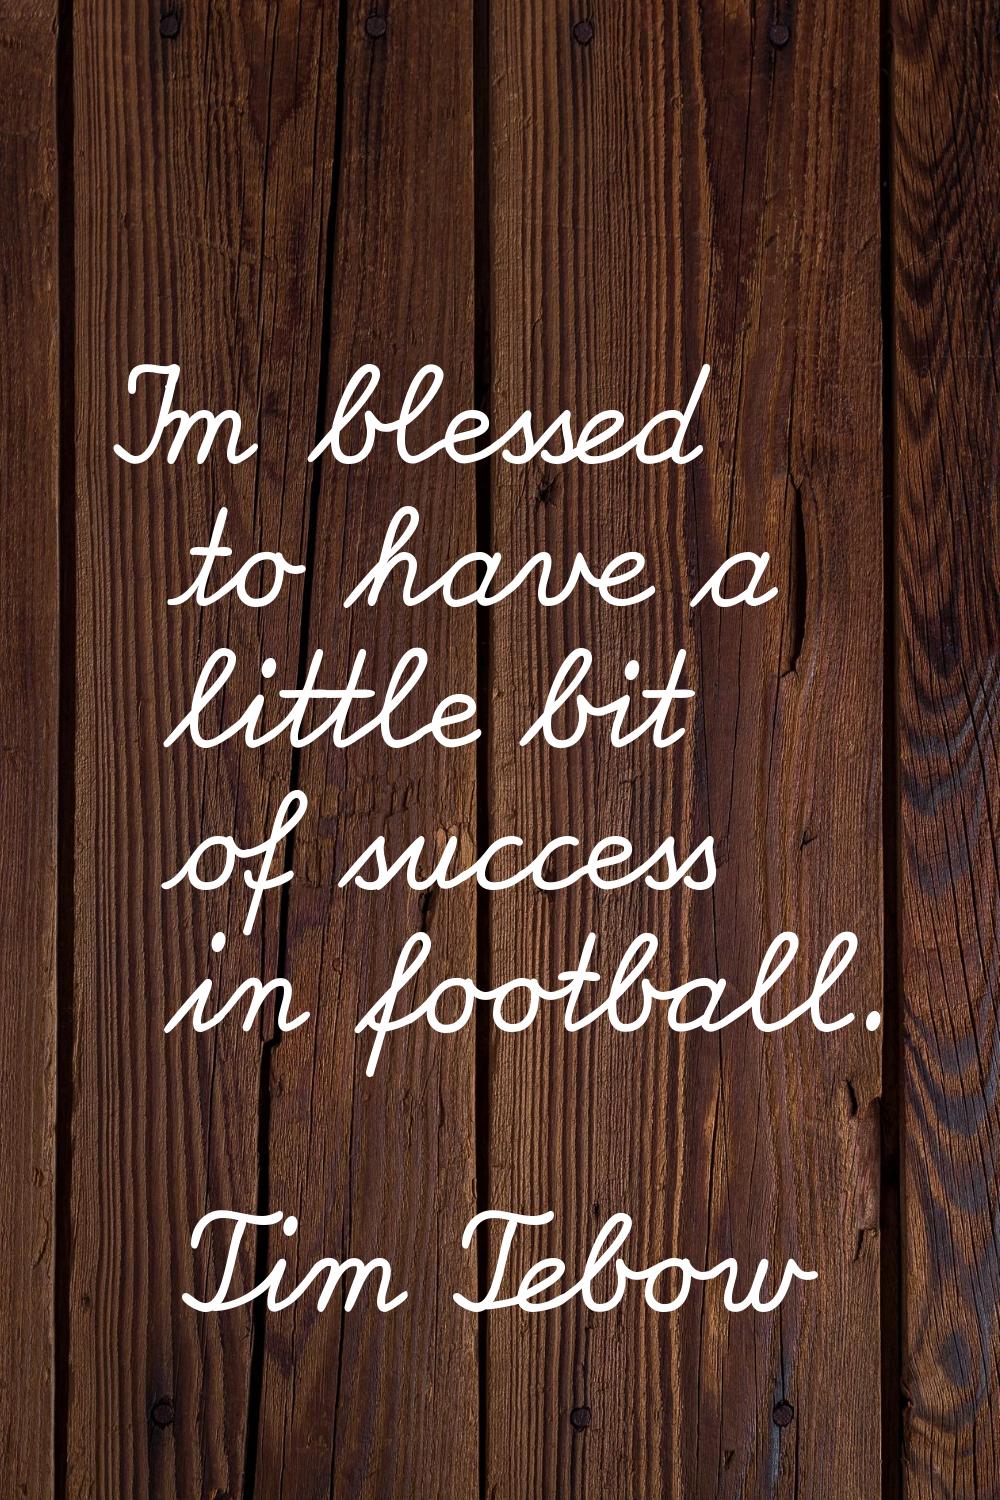 I'm blessed to have a little bit of success in football.